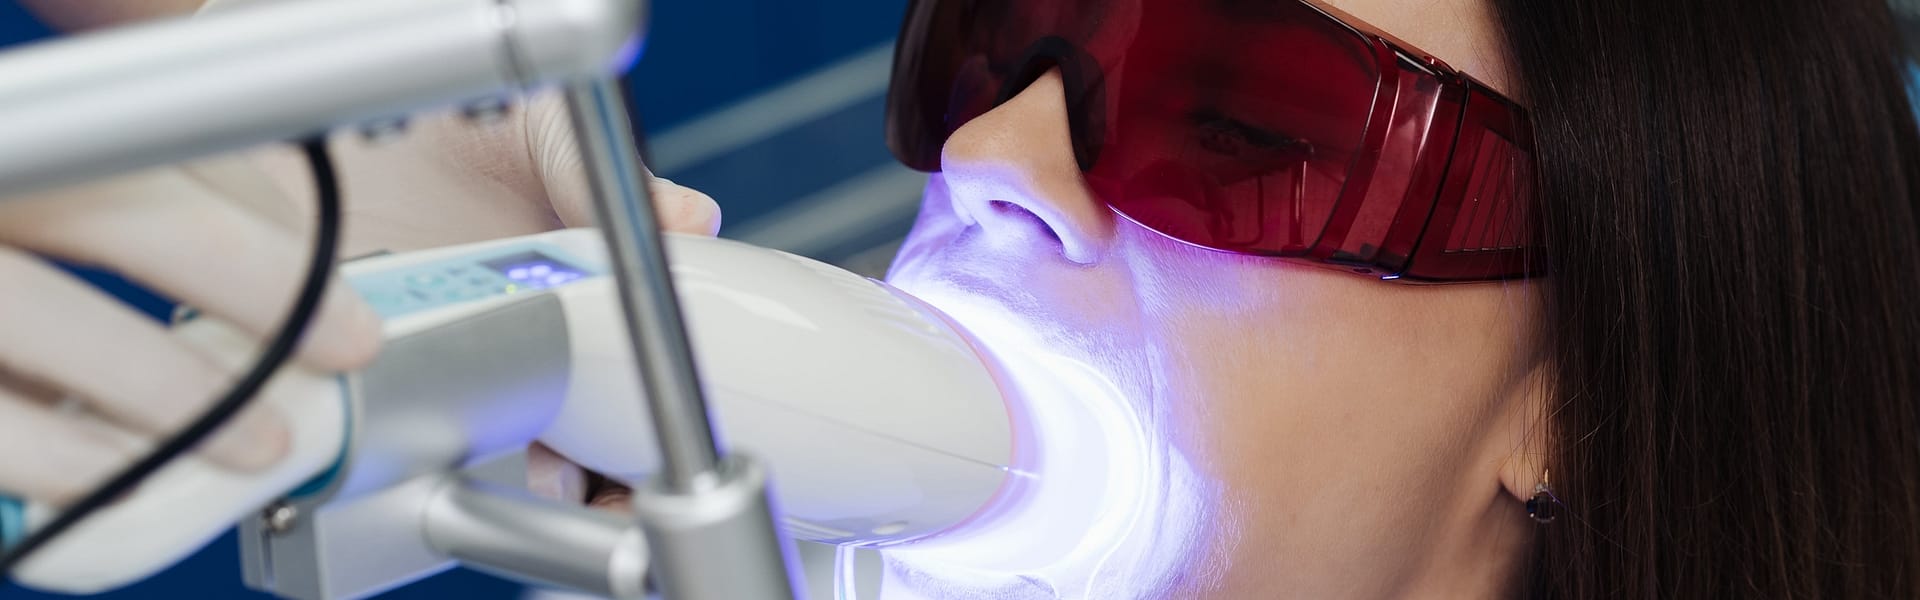 Zoom Teeth Whitening: Understanding the Risks and Benefits